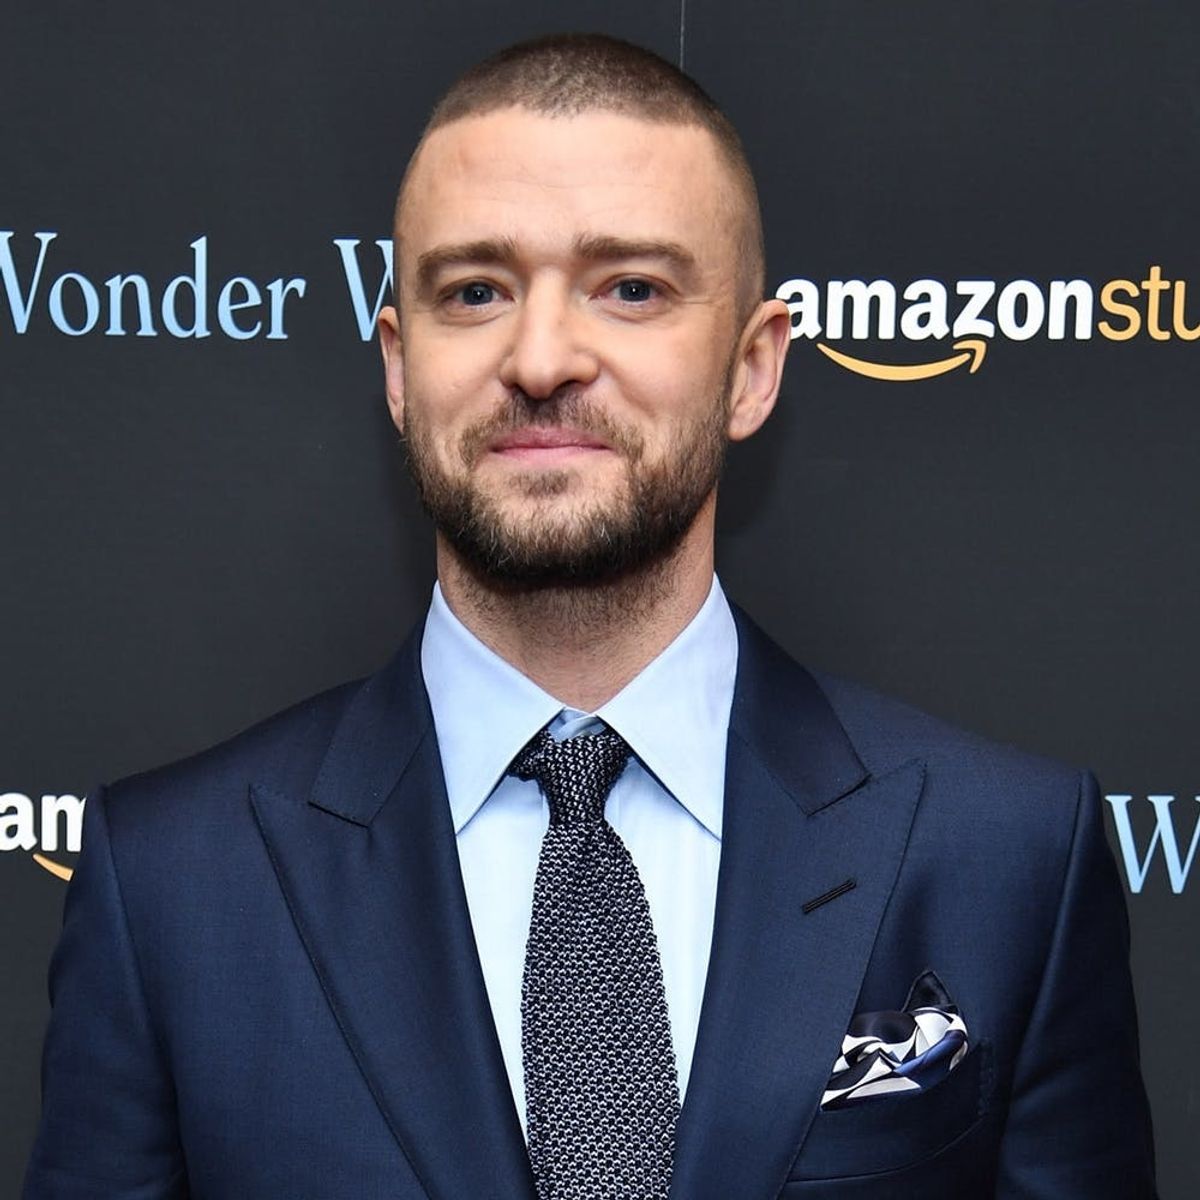 Justin Timberlake Just Dropped His New Single ‘Filthy’ and People Are Divided